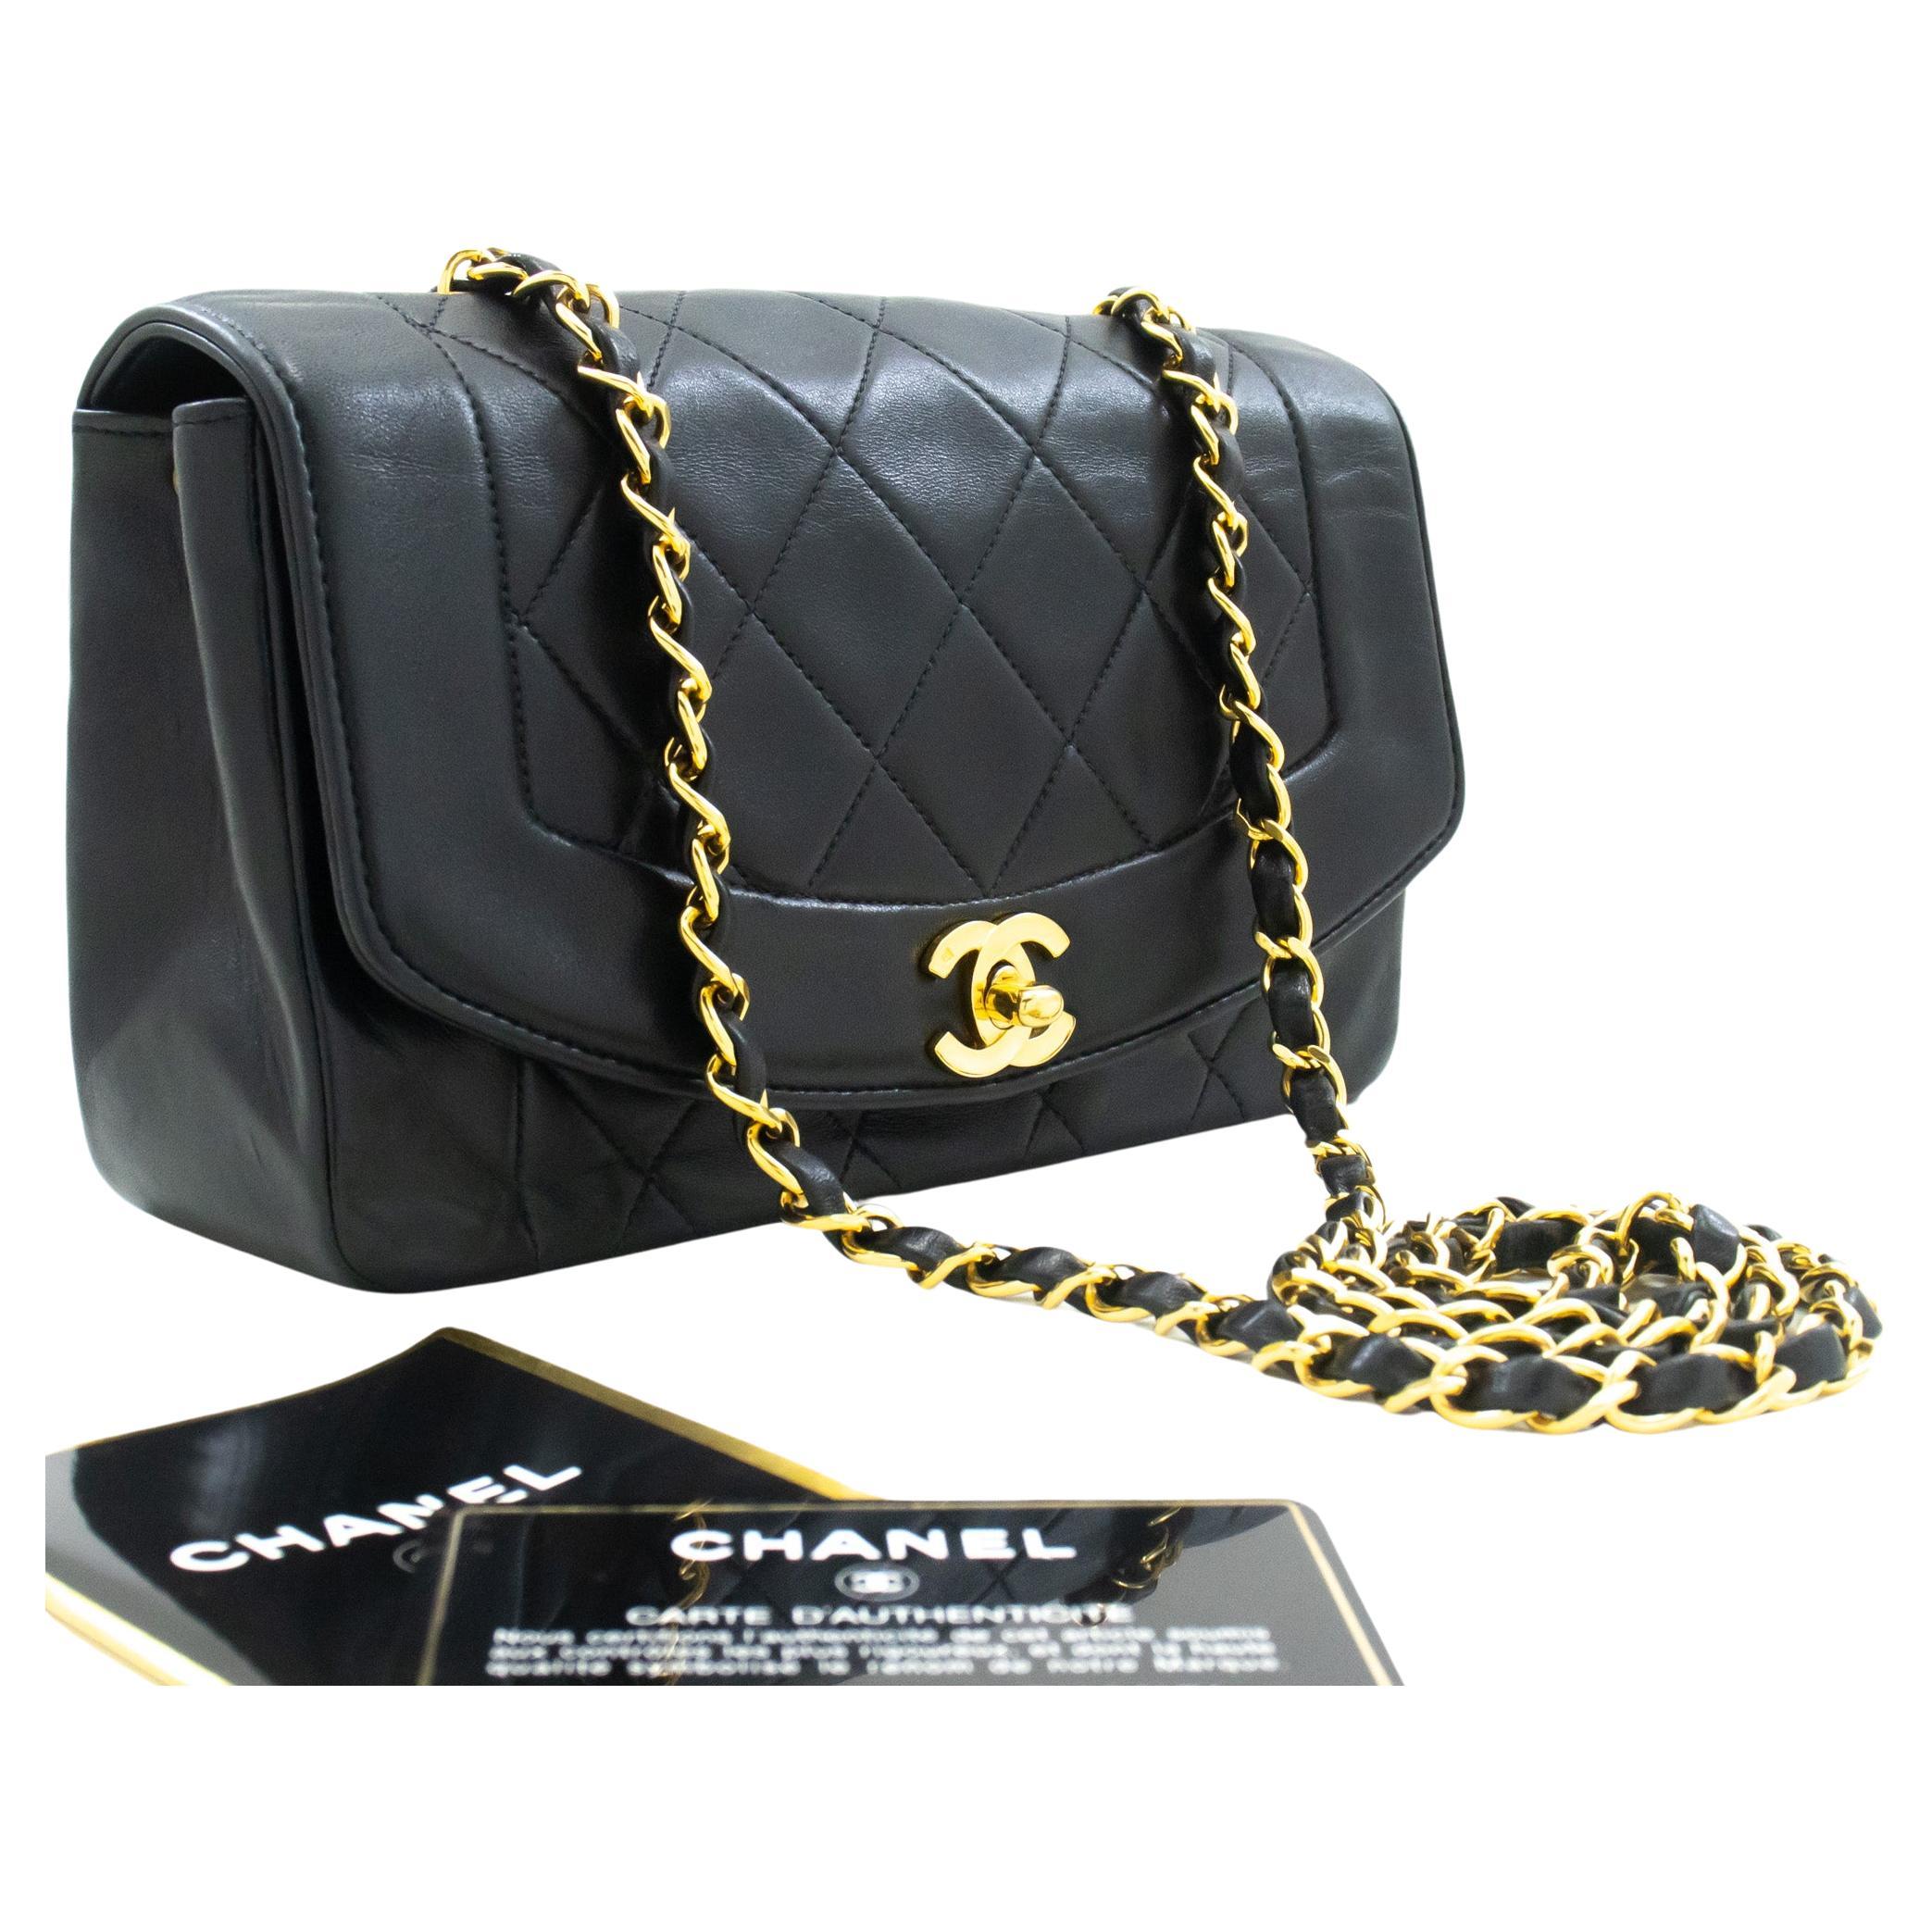 What is the oldest Chanel handbag?